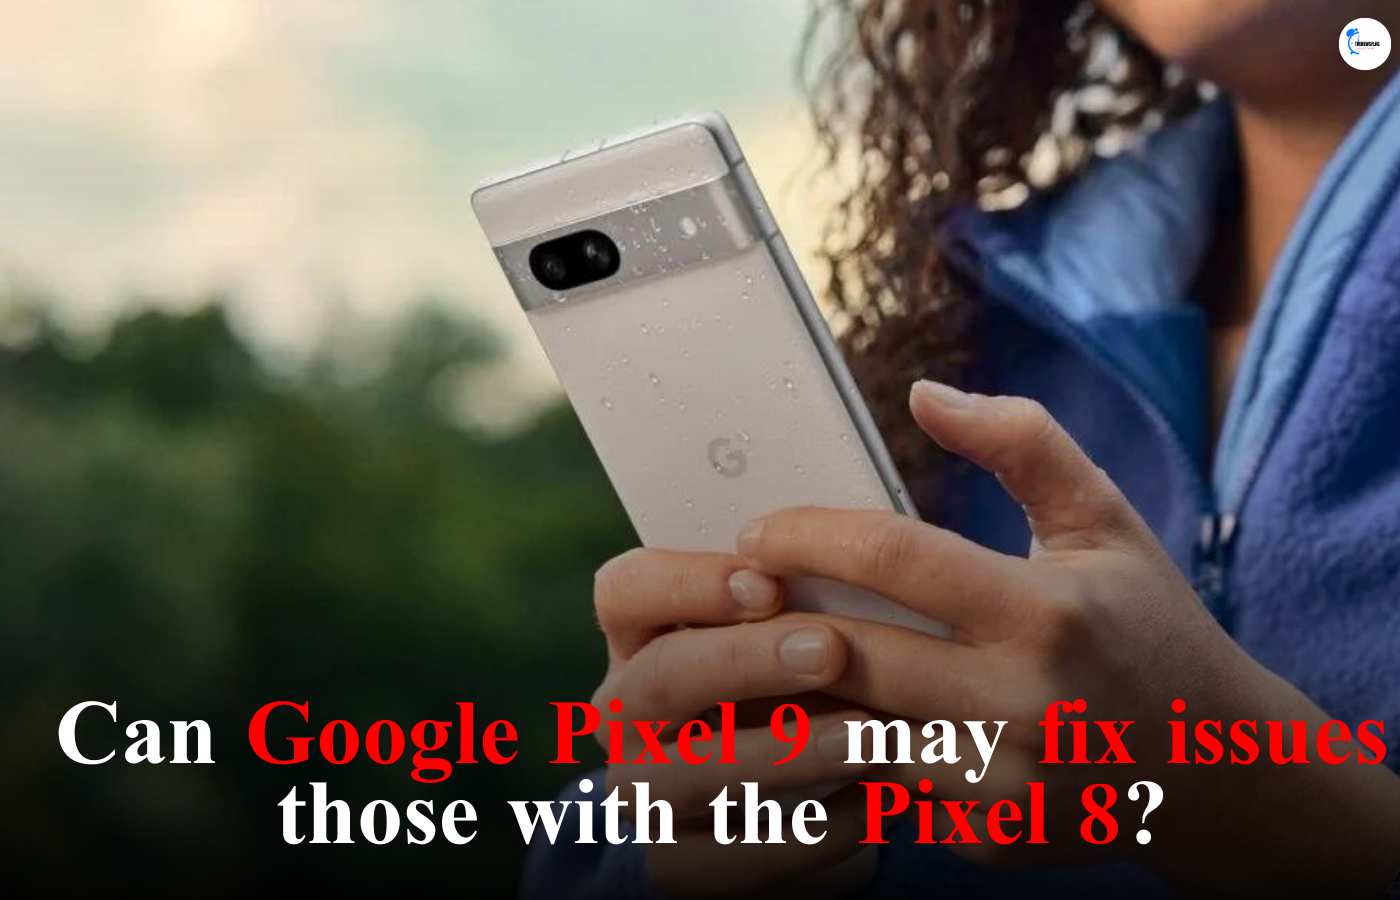 Can Google Pixel 9 may fix issues those with the Pixel 8?